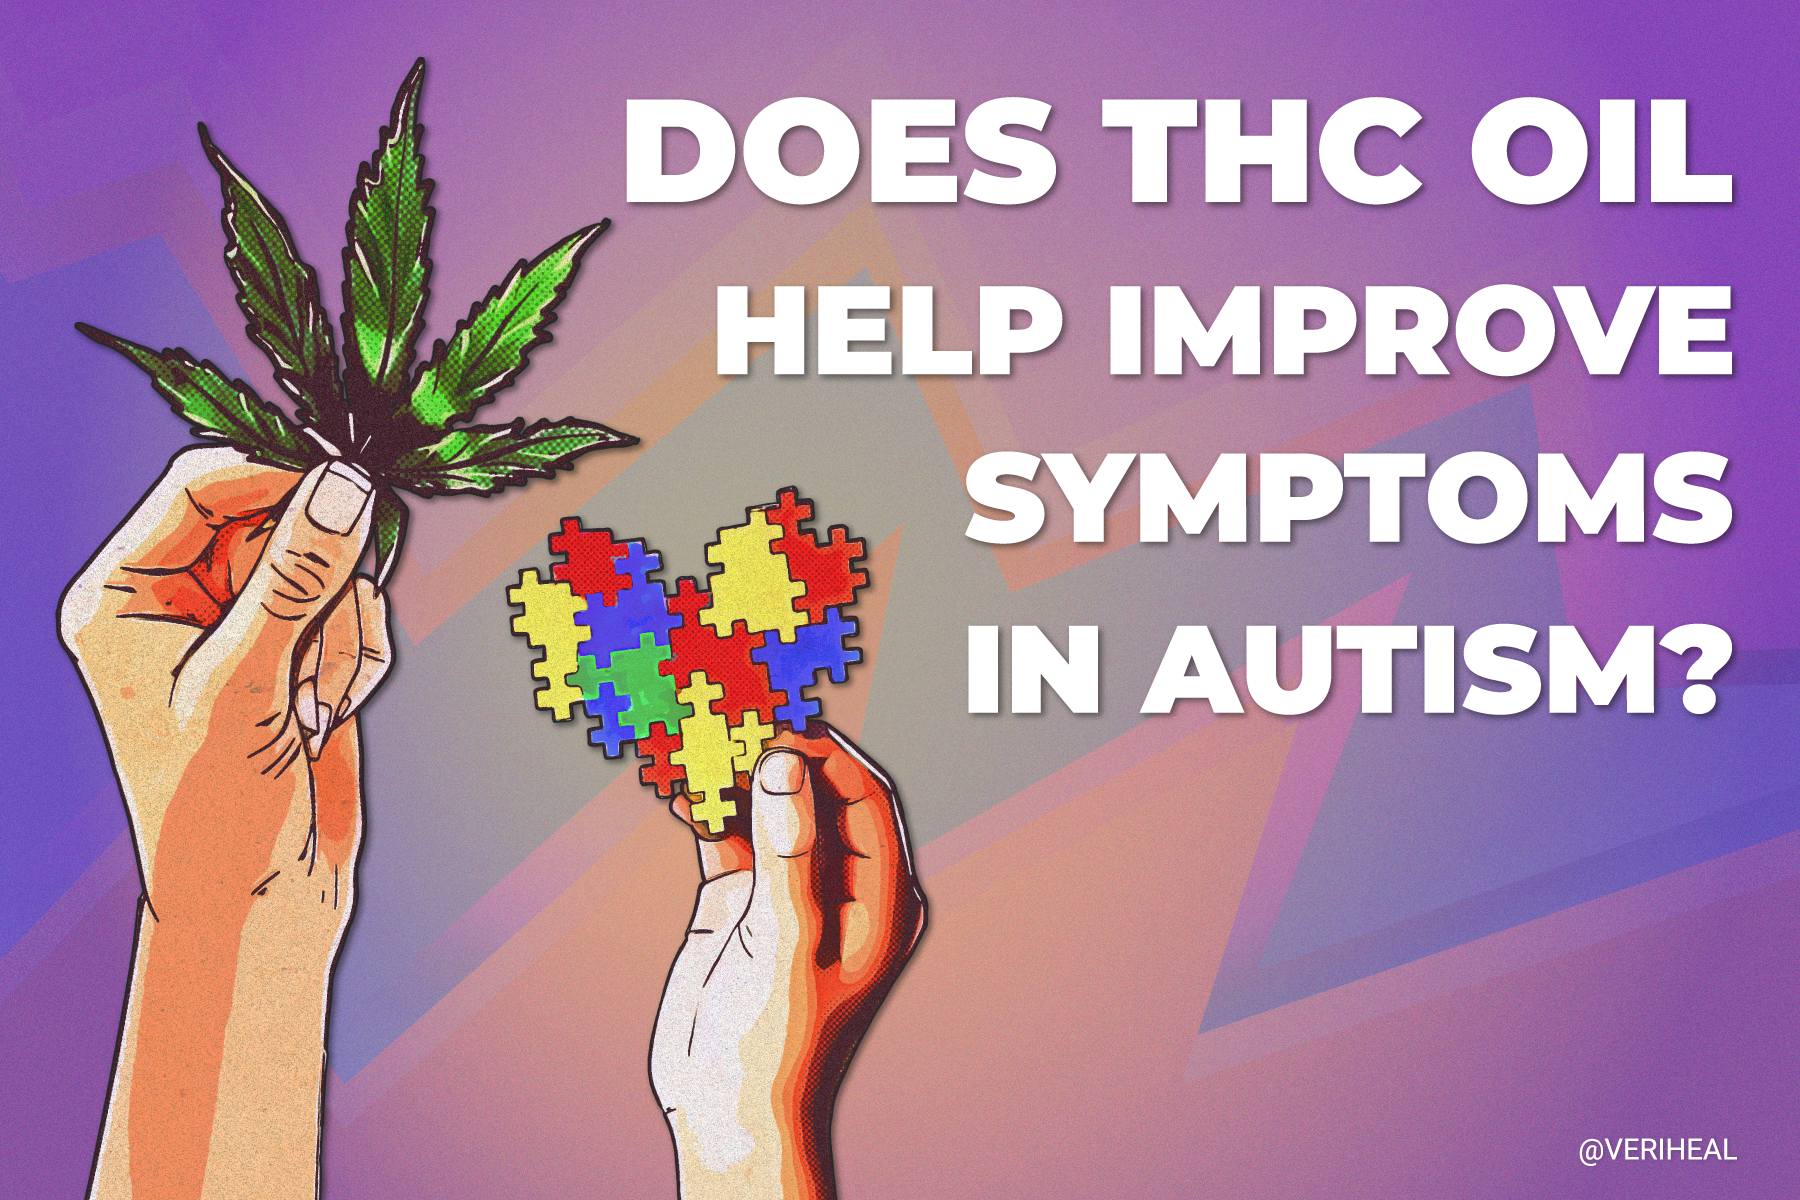 Israeli Study Finds THC Oil Effective in Improving Symptoms of Autism